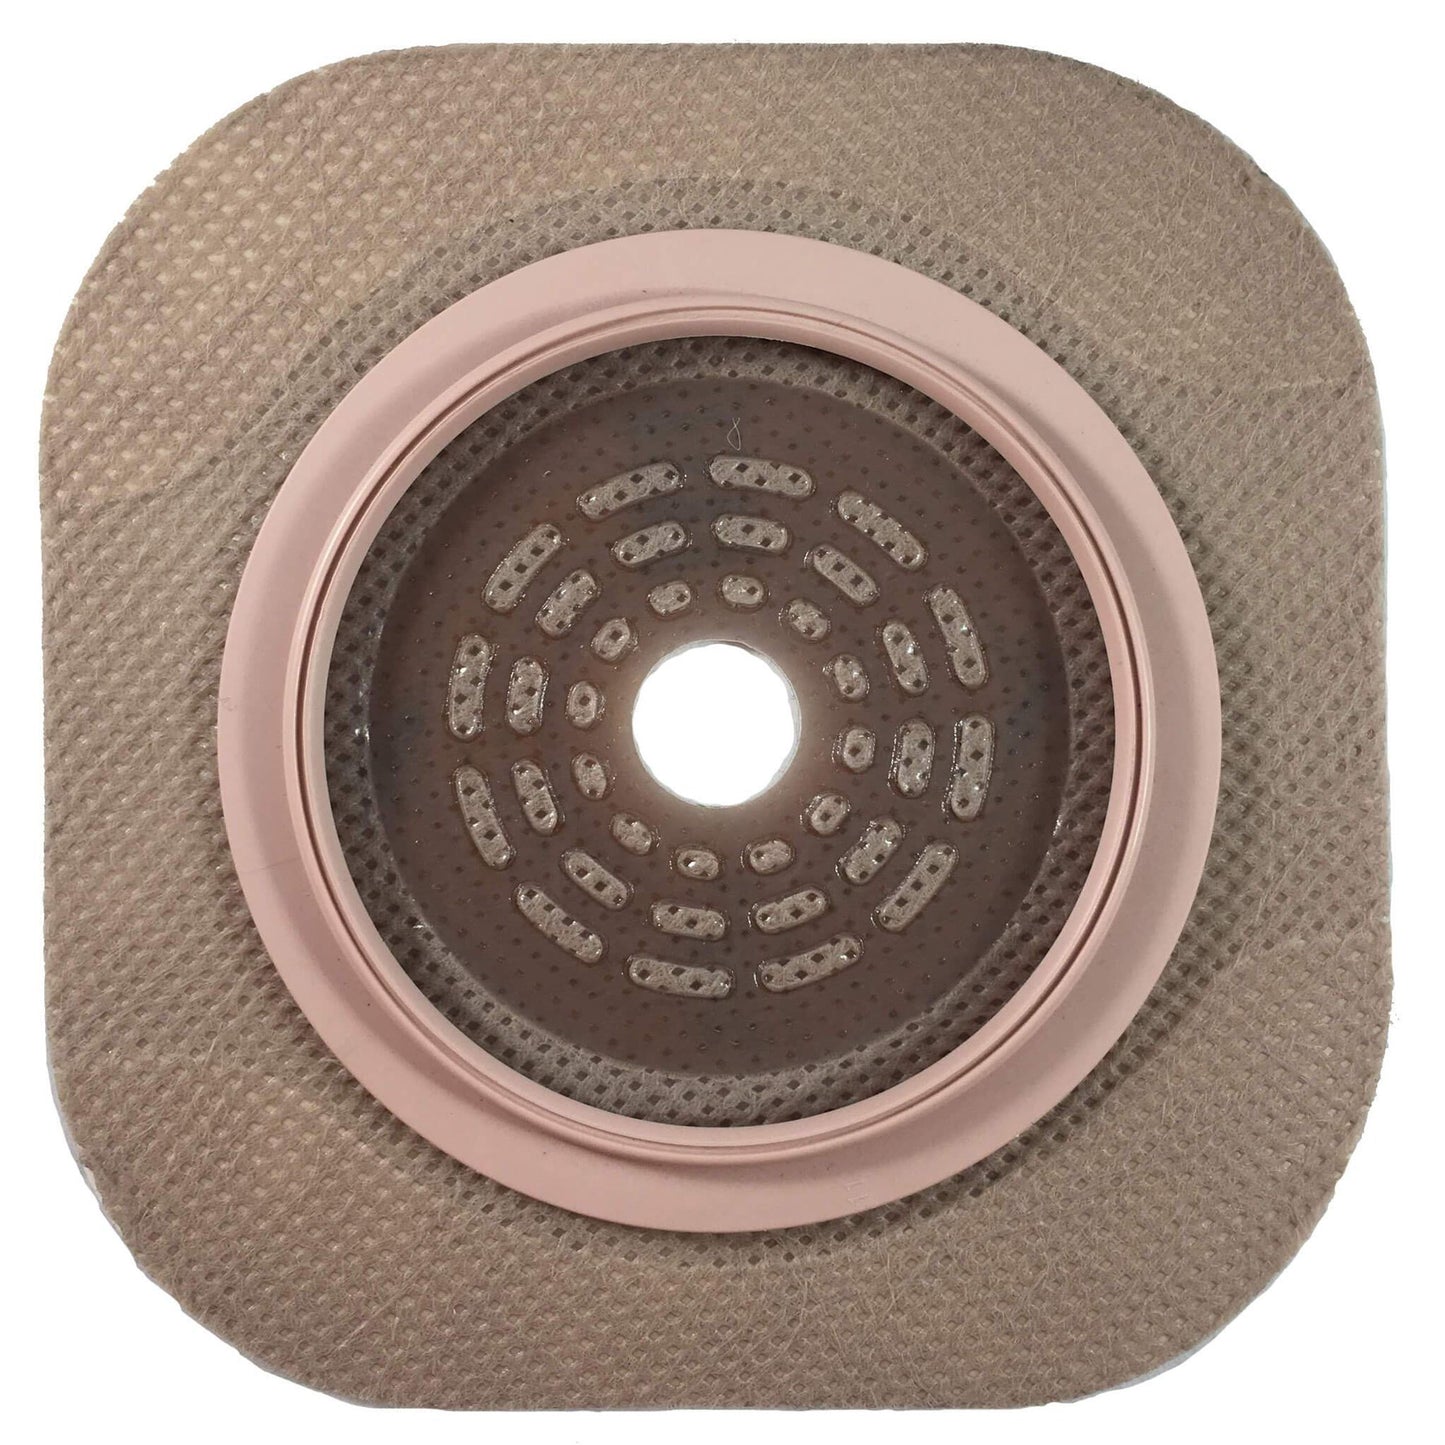 New Image™ Flextend™ Colostomy Barrier With Up to 1.75 Inch Stoma Opening, 5 ct